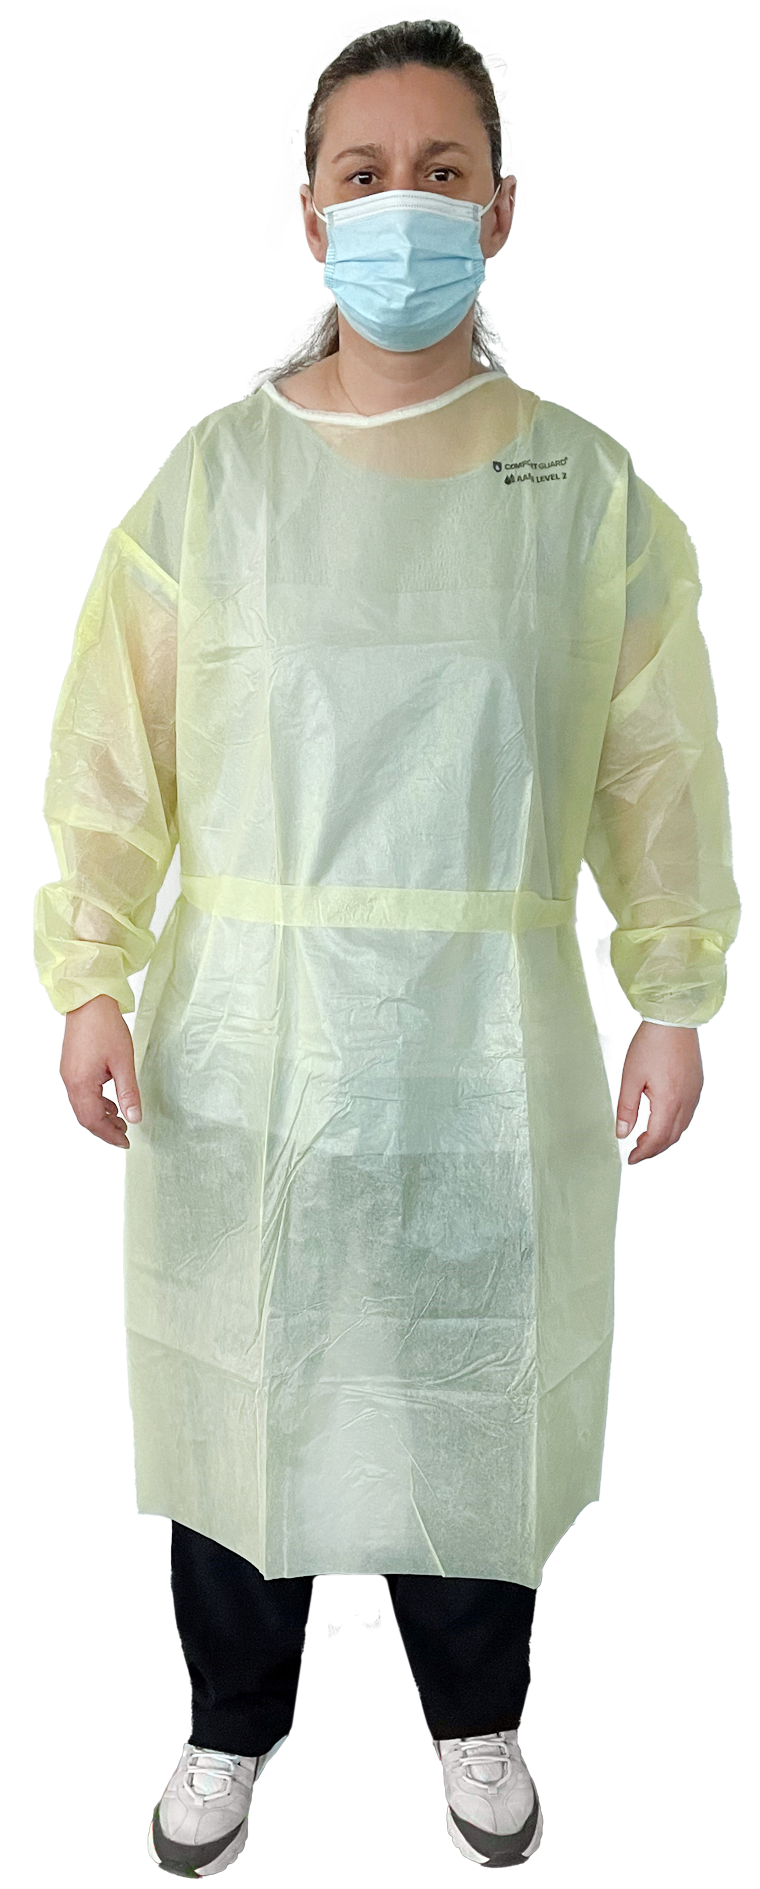 60 3107 GRI Isolation Gown Yellow